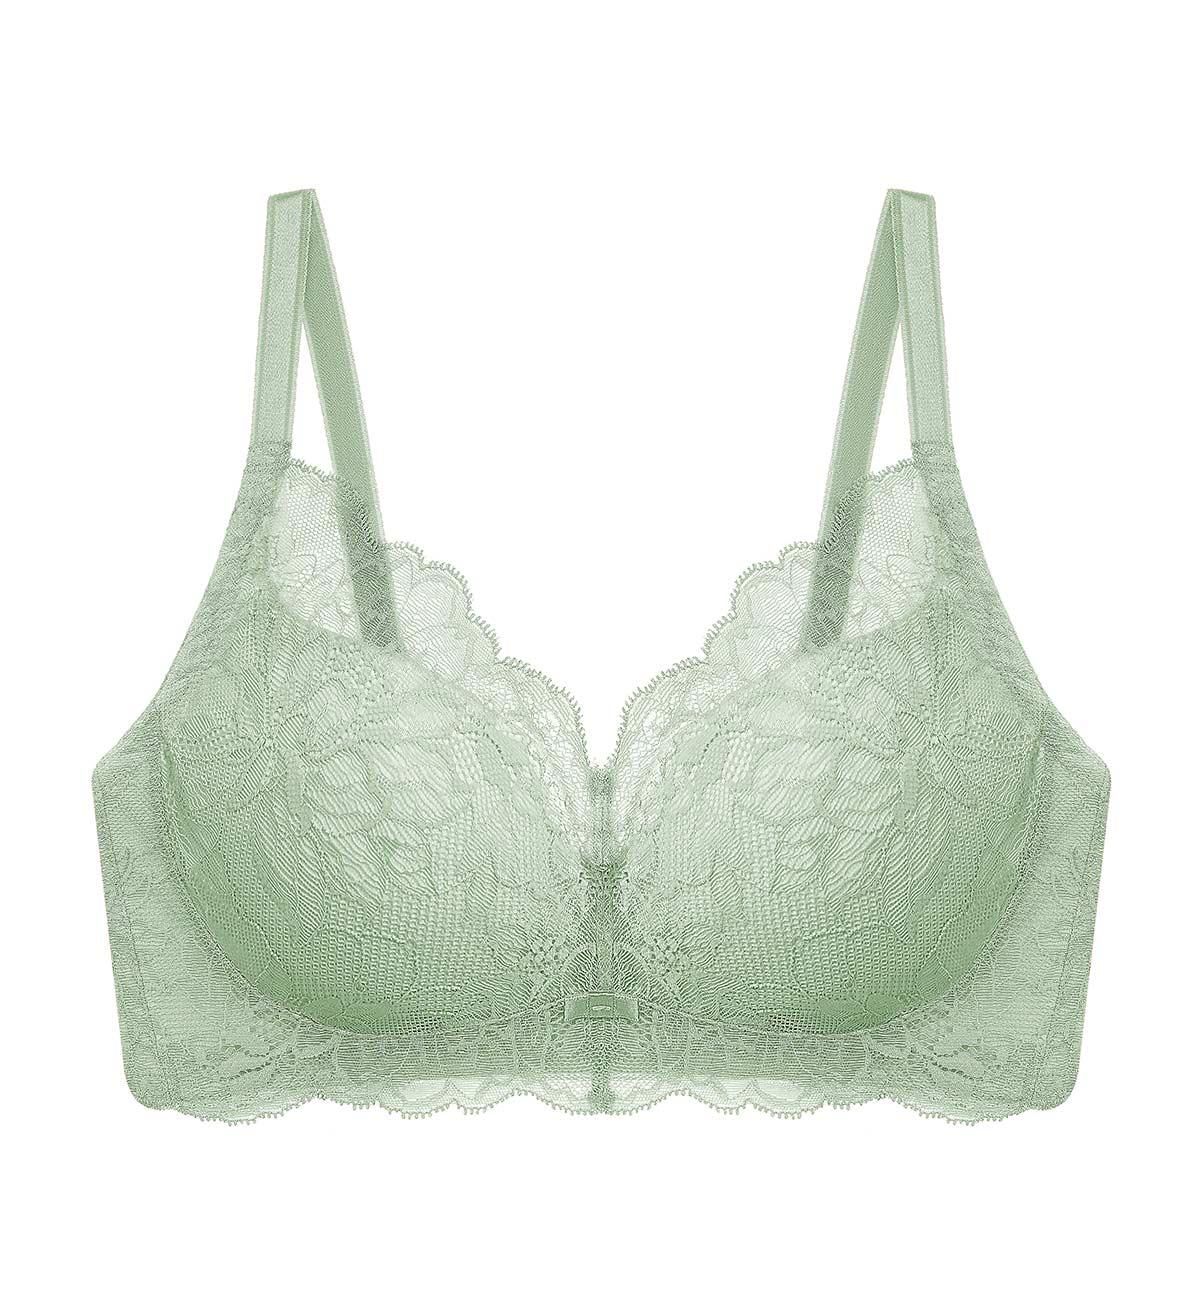 Non-wired Bras, Natural Support, Natural Elegance Non-Wired Support Bra